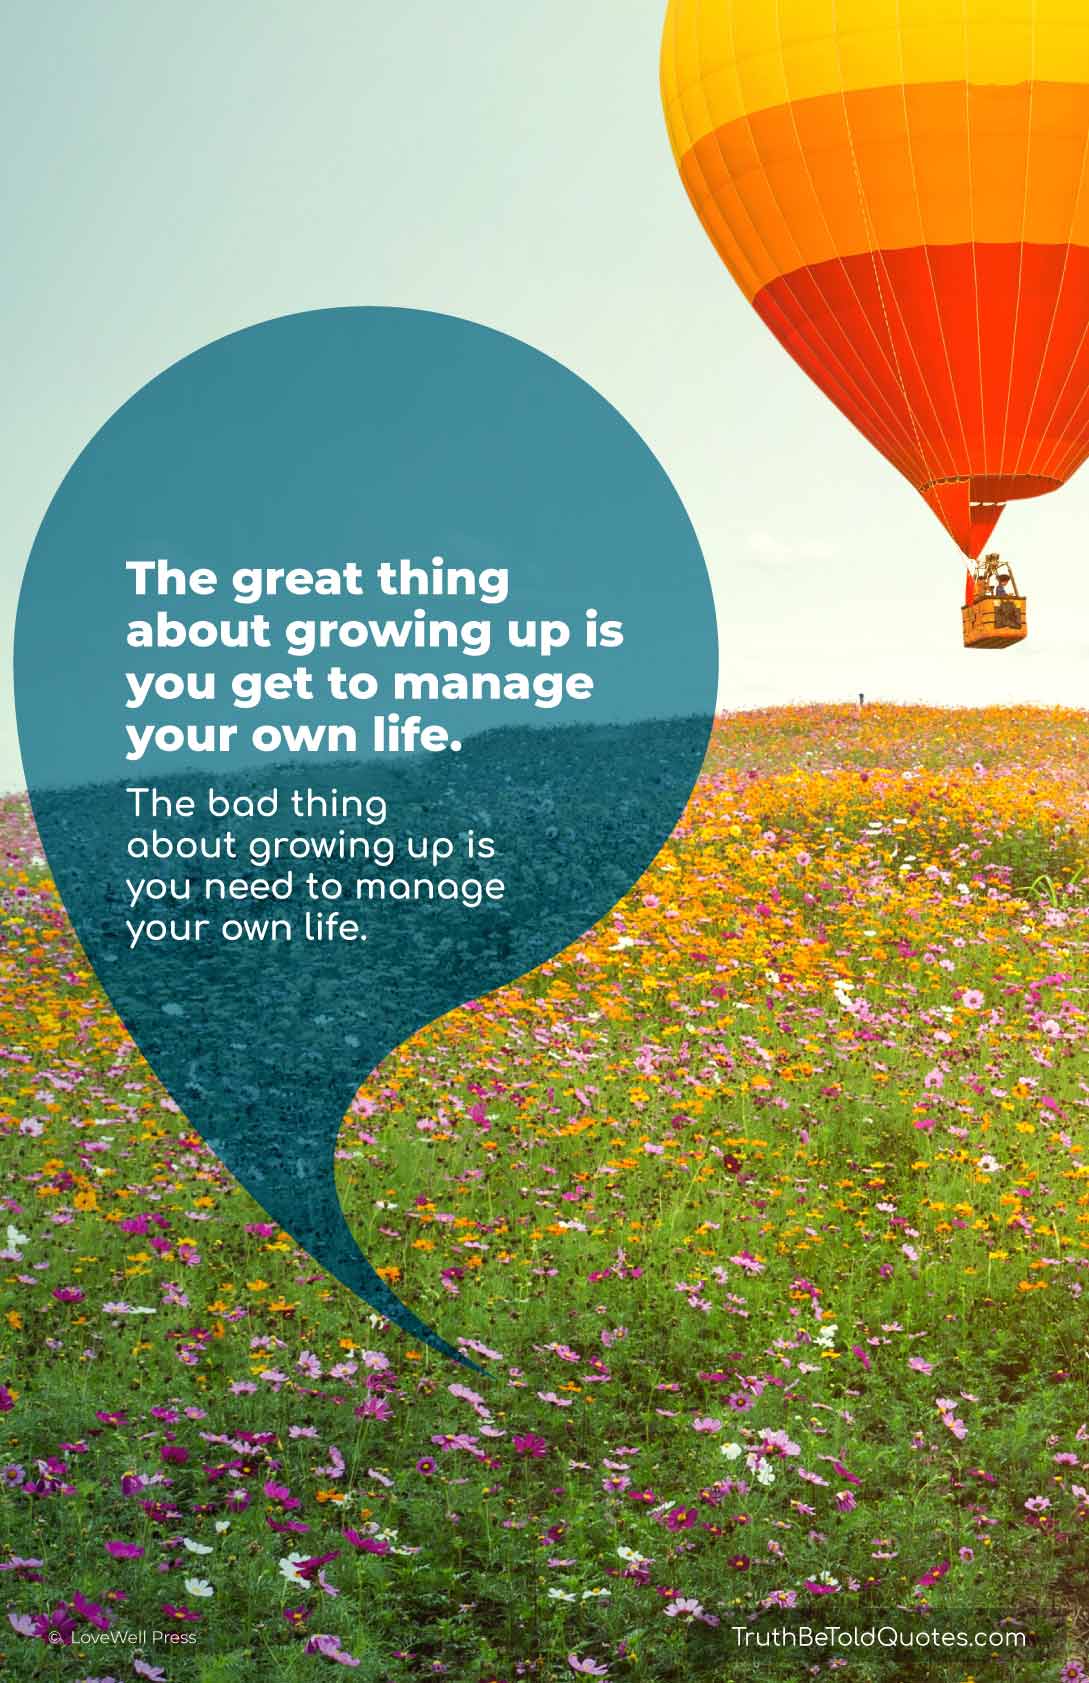 Quote for teens on growing up with responsibility- 'The great thing about growing up is...'